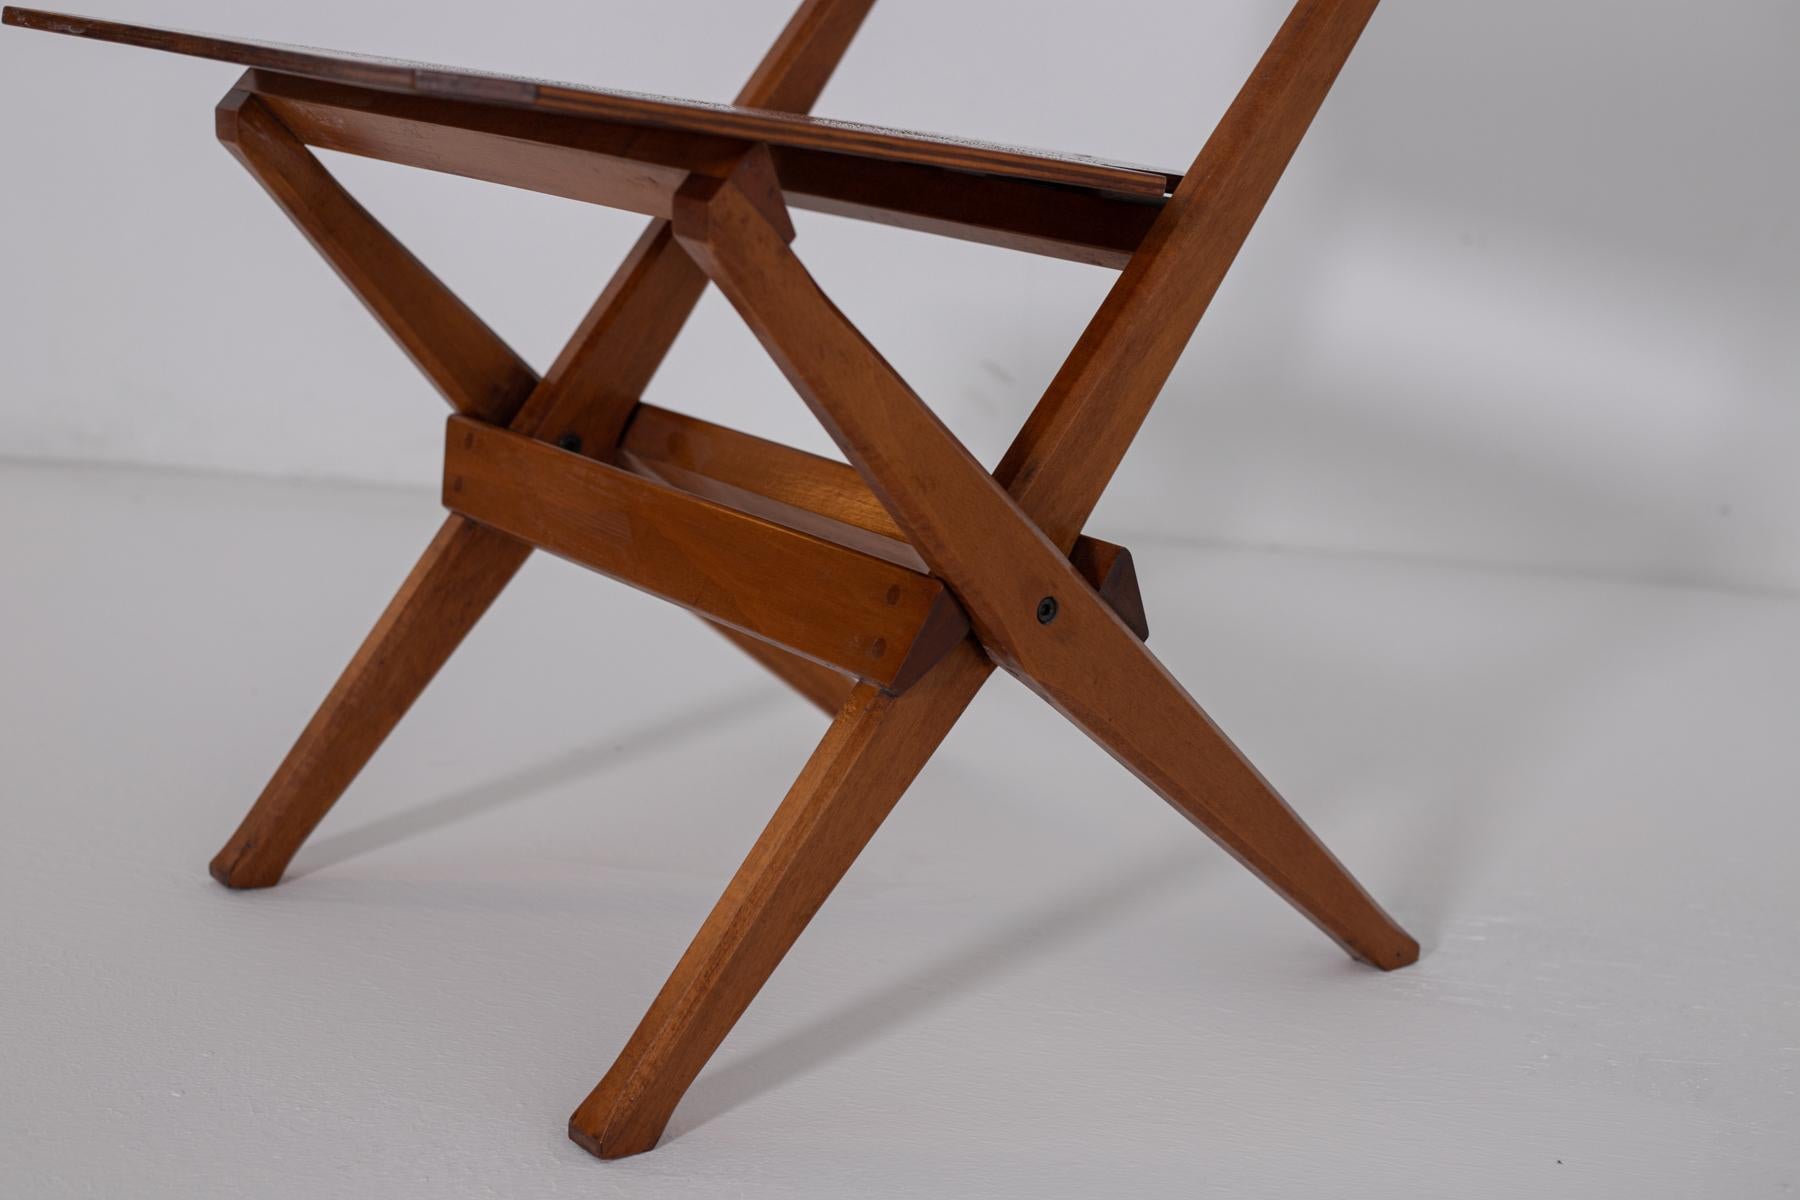 Beautiful pair of chairs made of wood, designed by Franco Albini for the fine Italian manufacture Poggi in the 1950s. 
The chairs by Franco Albini are made of solid wood and thanks to the closing mechanisms are easily foldable.
The chairs have a